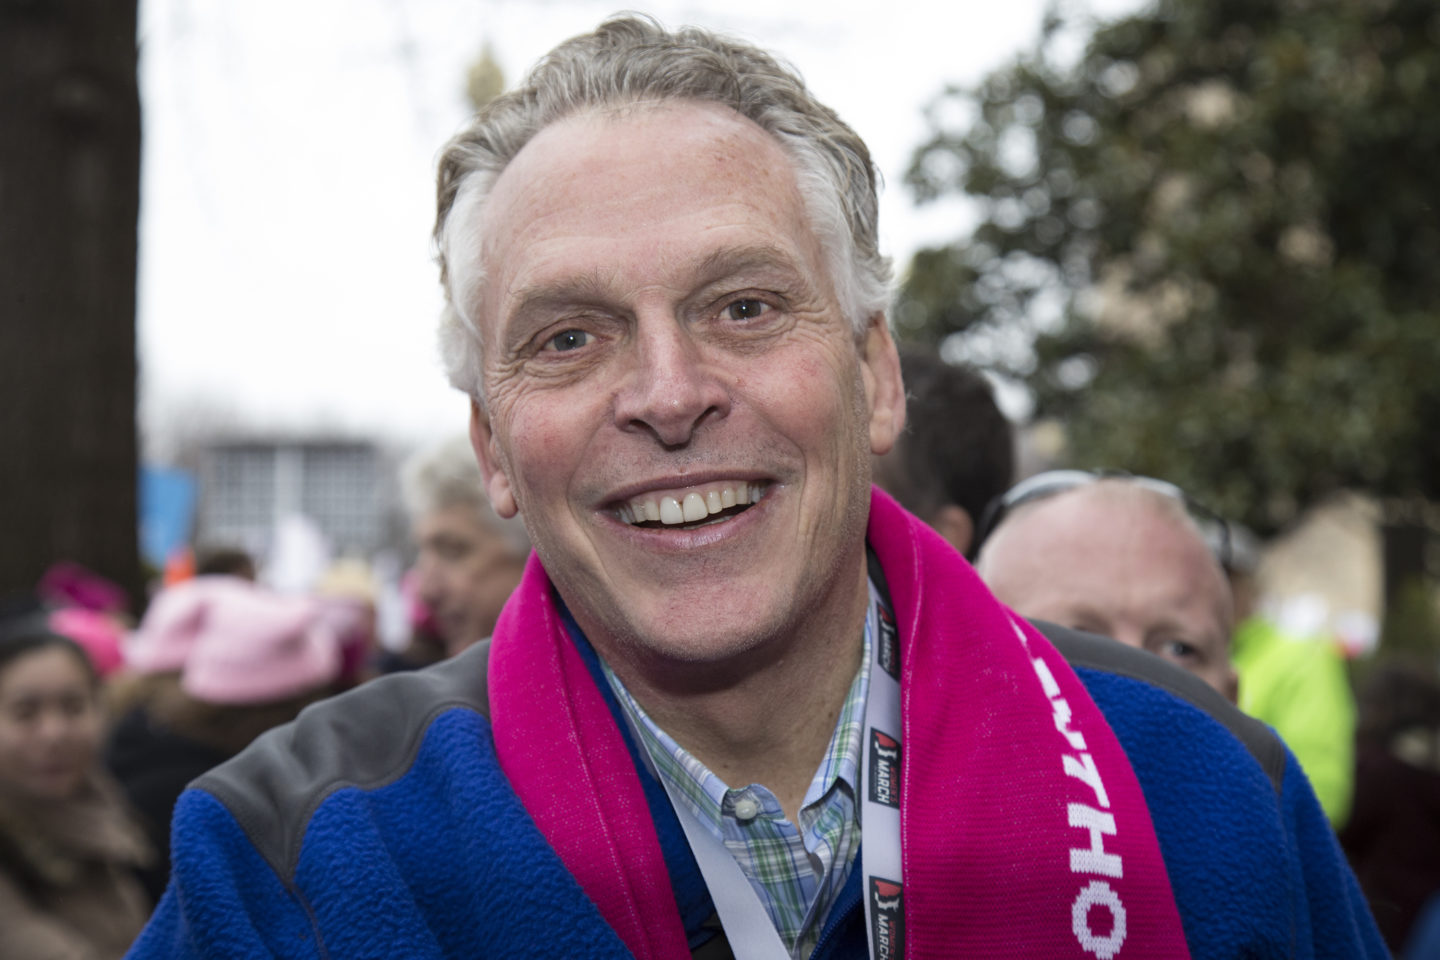 Virginia’s Governor Vetoes Bill That Would Have Defunded Planned Parenthood